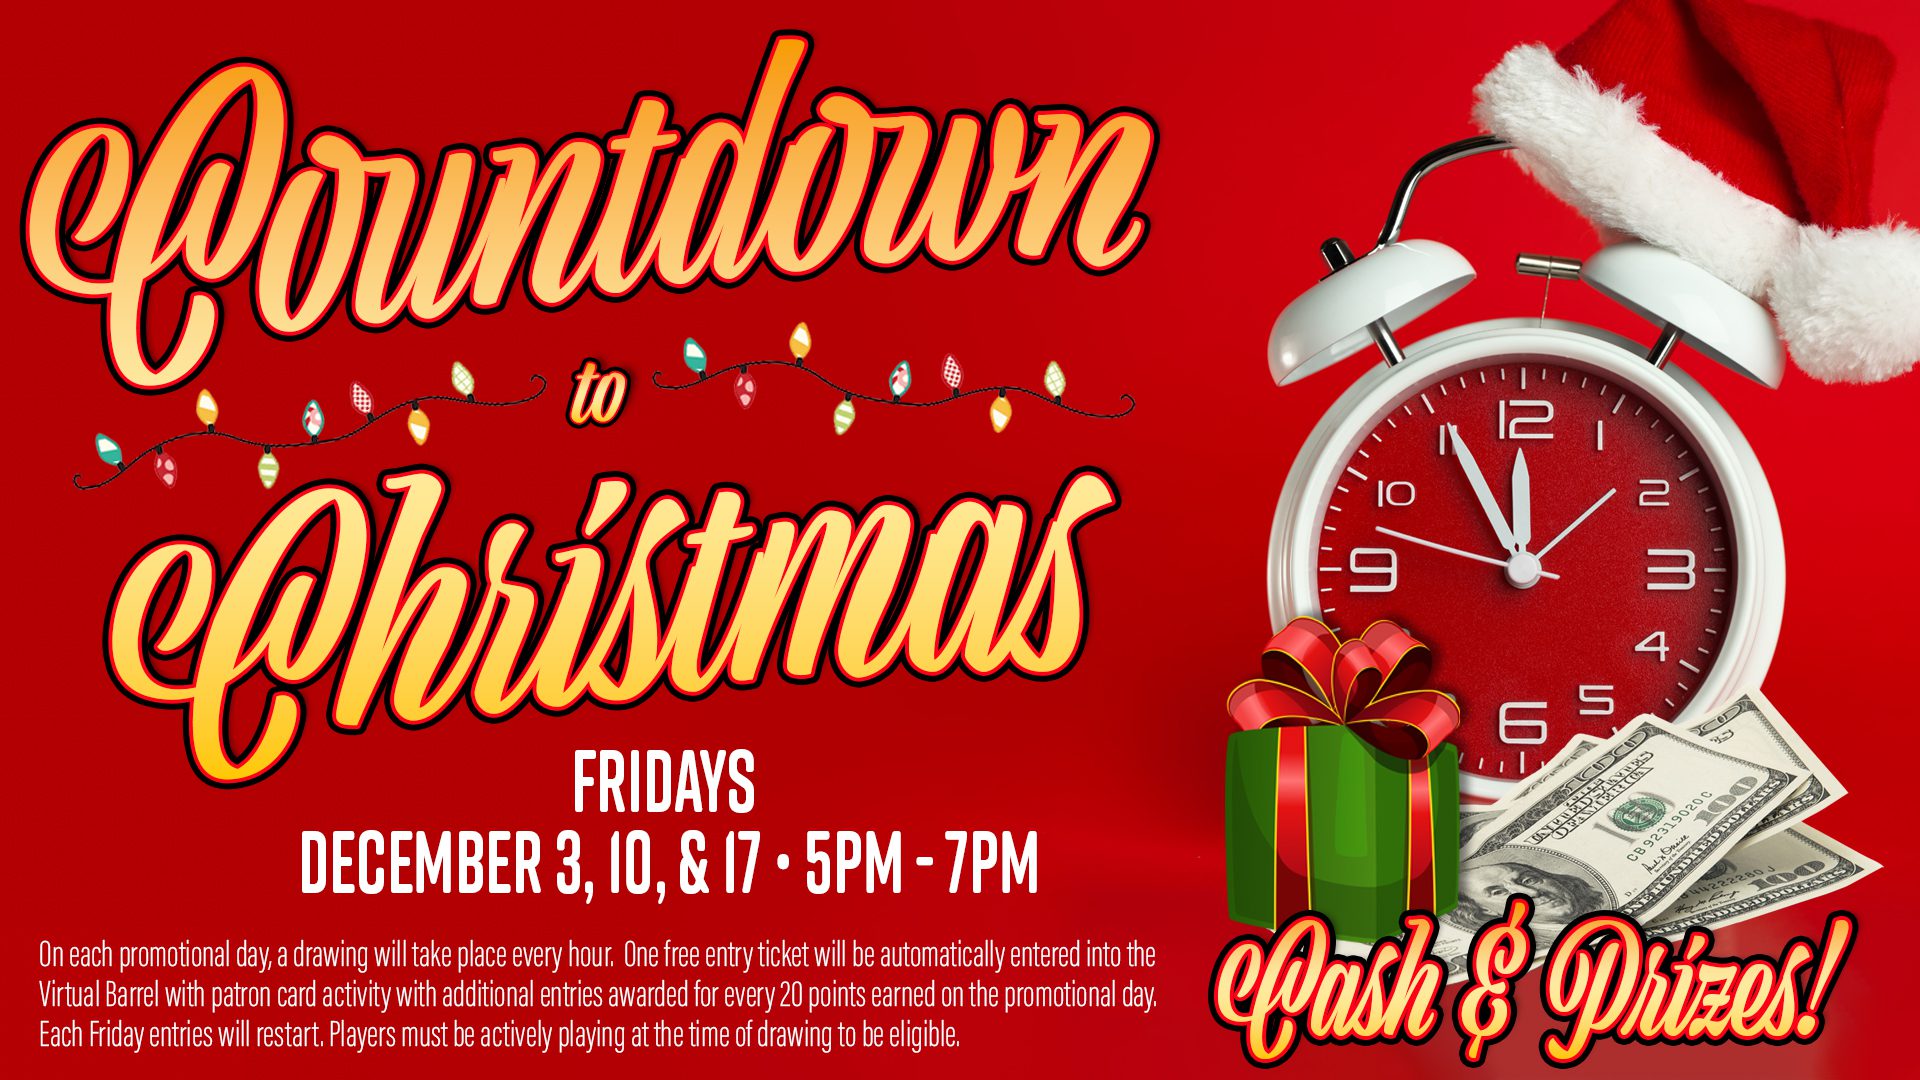 Festive advertisement for a "countdown to christmas" event featuring cash and prizes on fridays with specific dates and times listed, alongside a clock, cash, and christmas imagery.